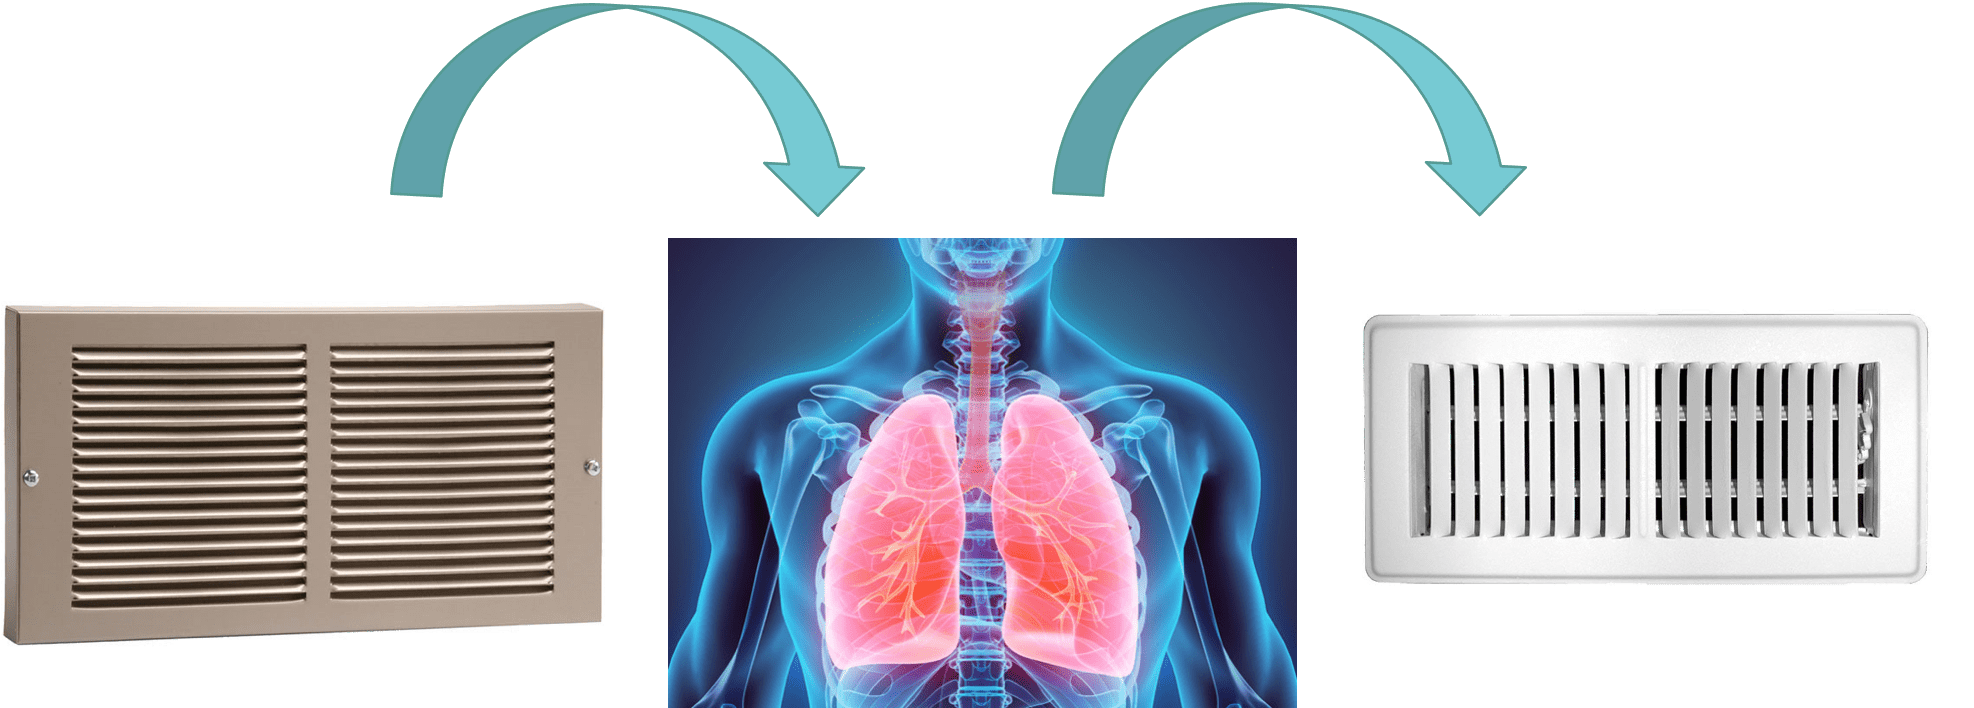 HVAC System is the lungs of your home